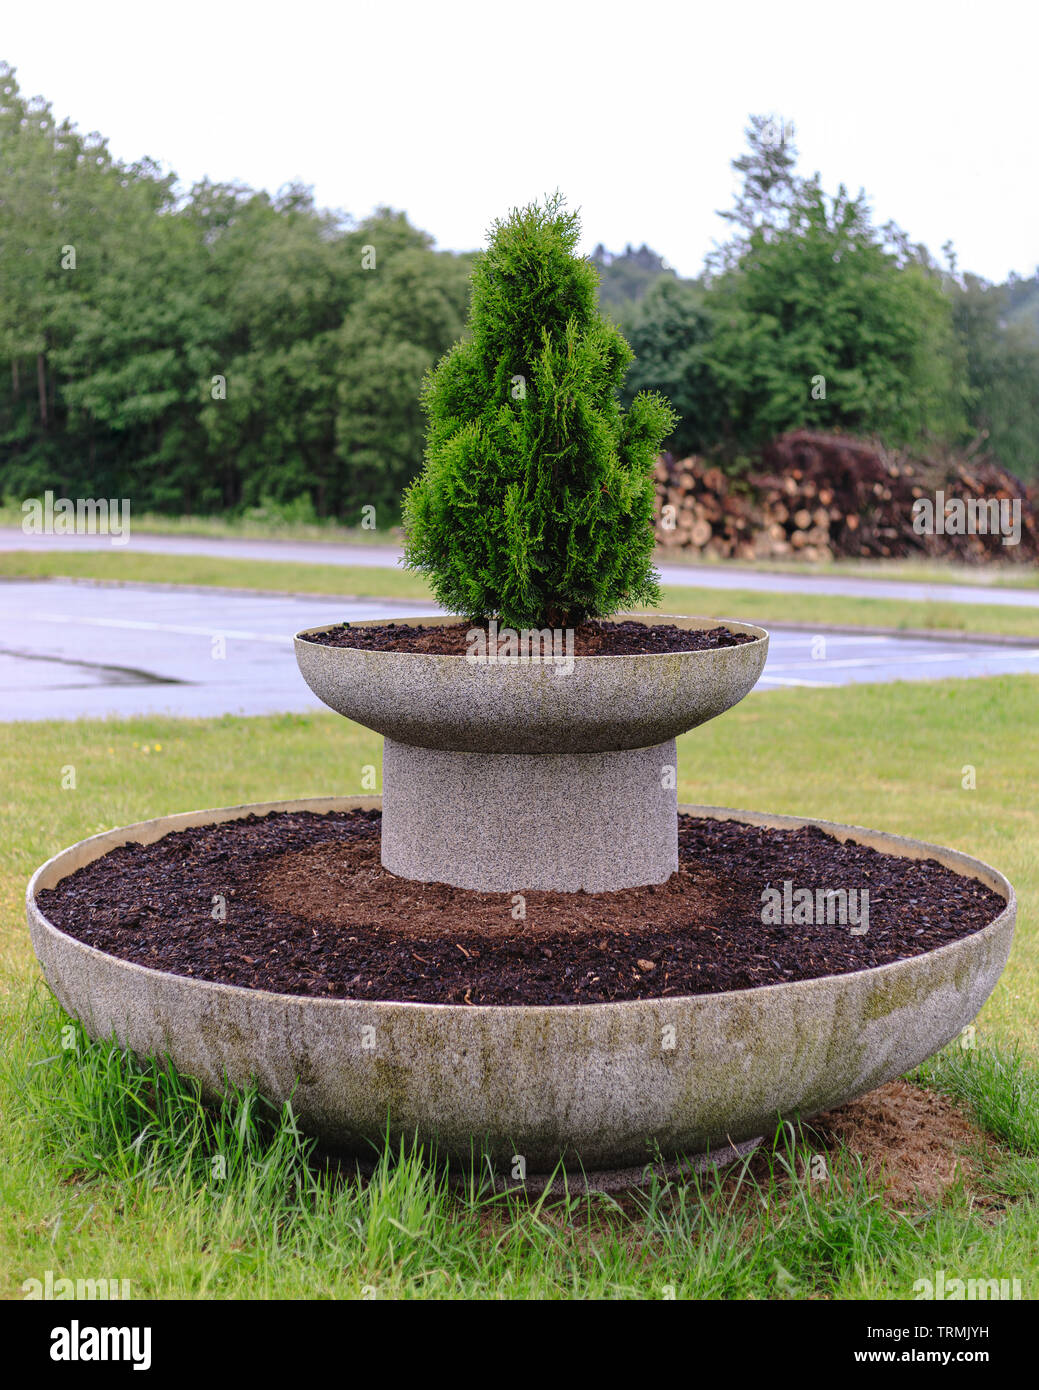 Large two tiered public concrete planter pot with small evergreen fir shrub on top Stock Photo